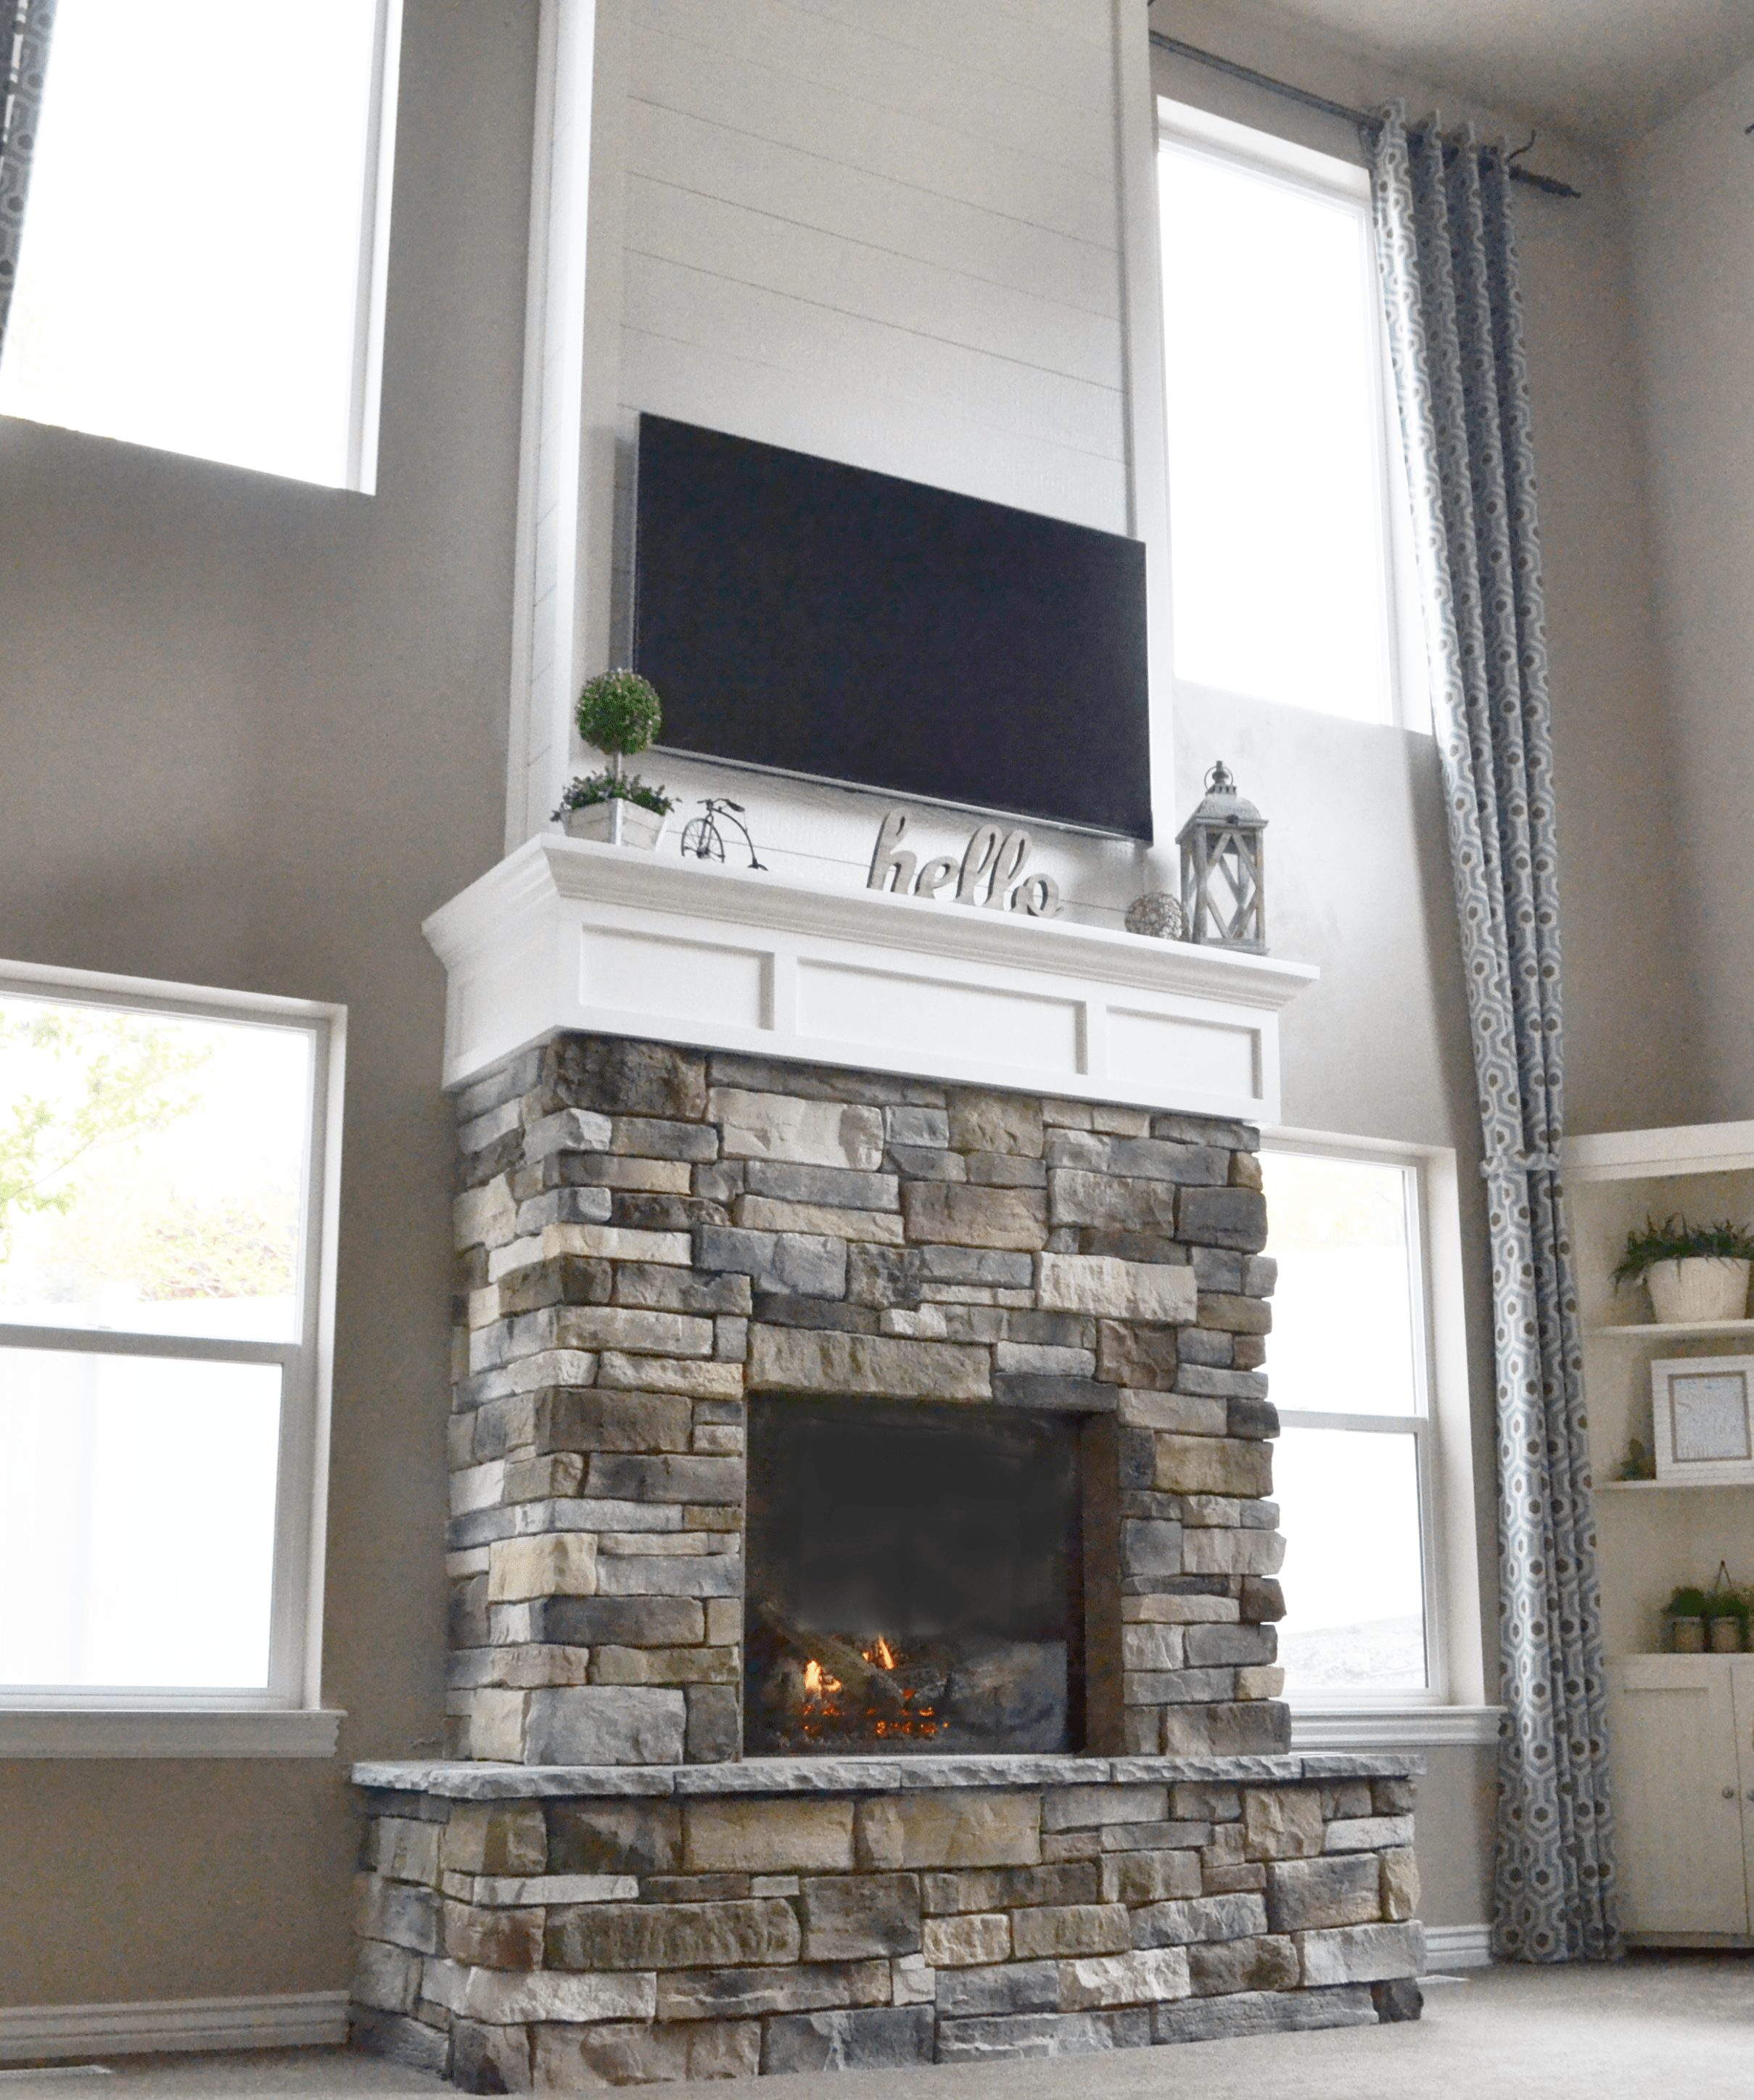 Airstone Fireplace Lovely Diy Fireplace with Stone & Shiplap